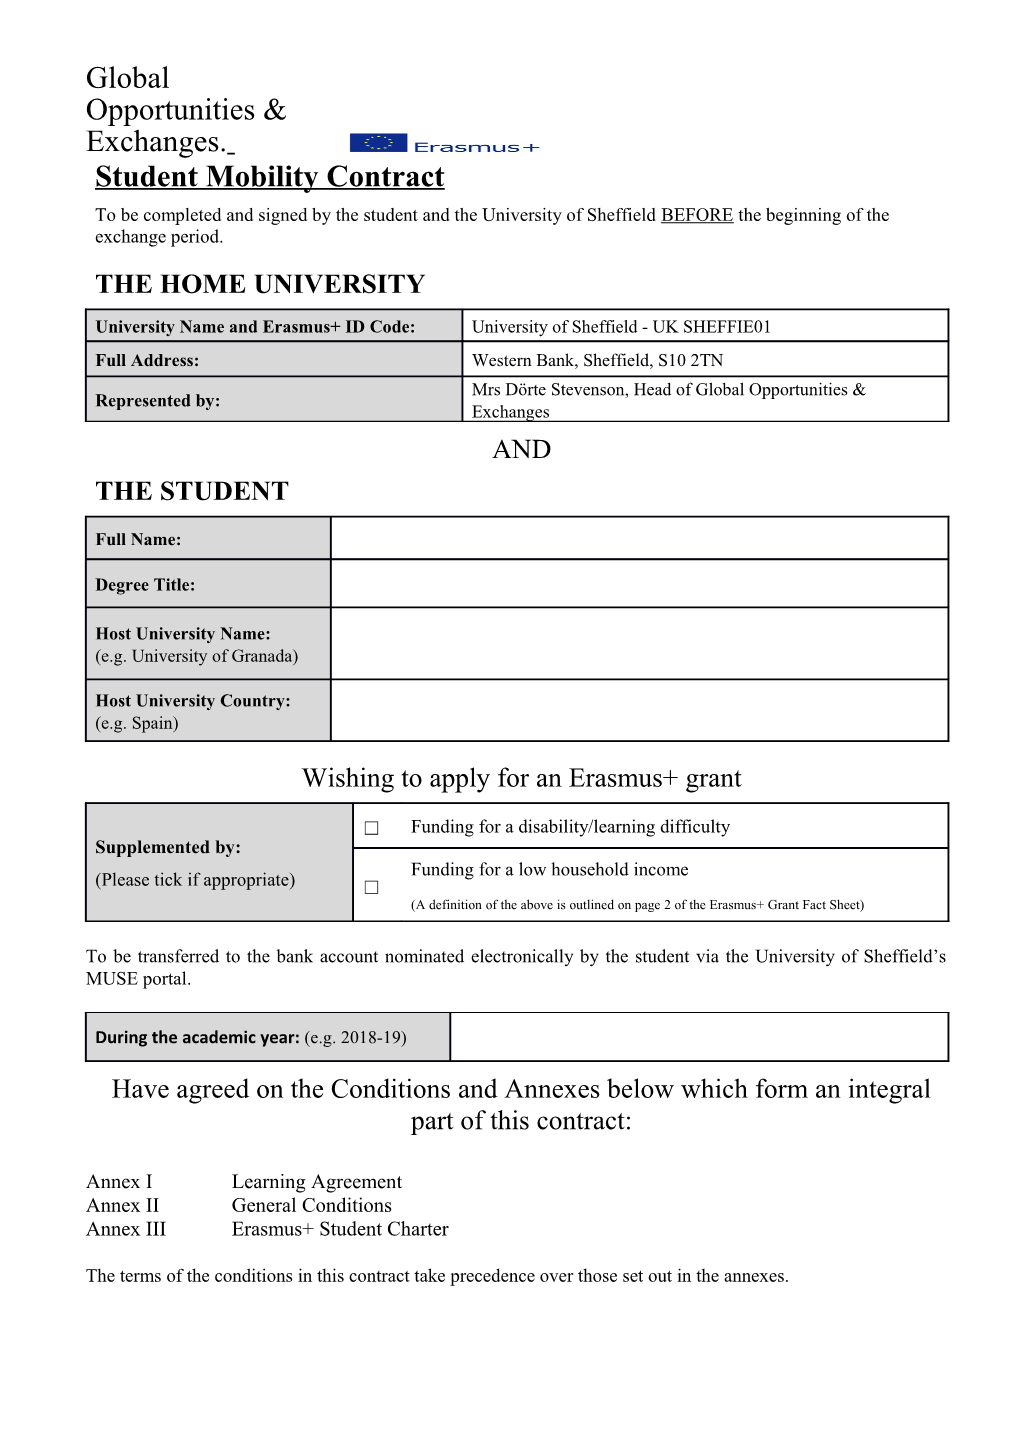 Student Mobility Contract